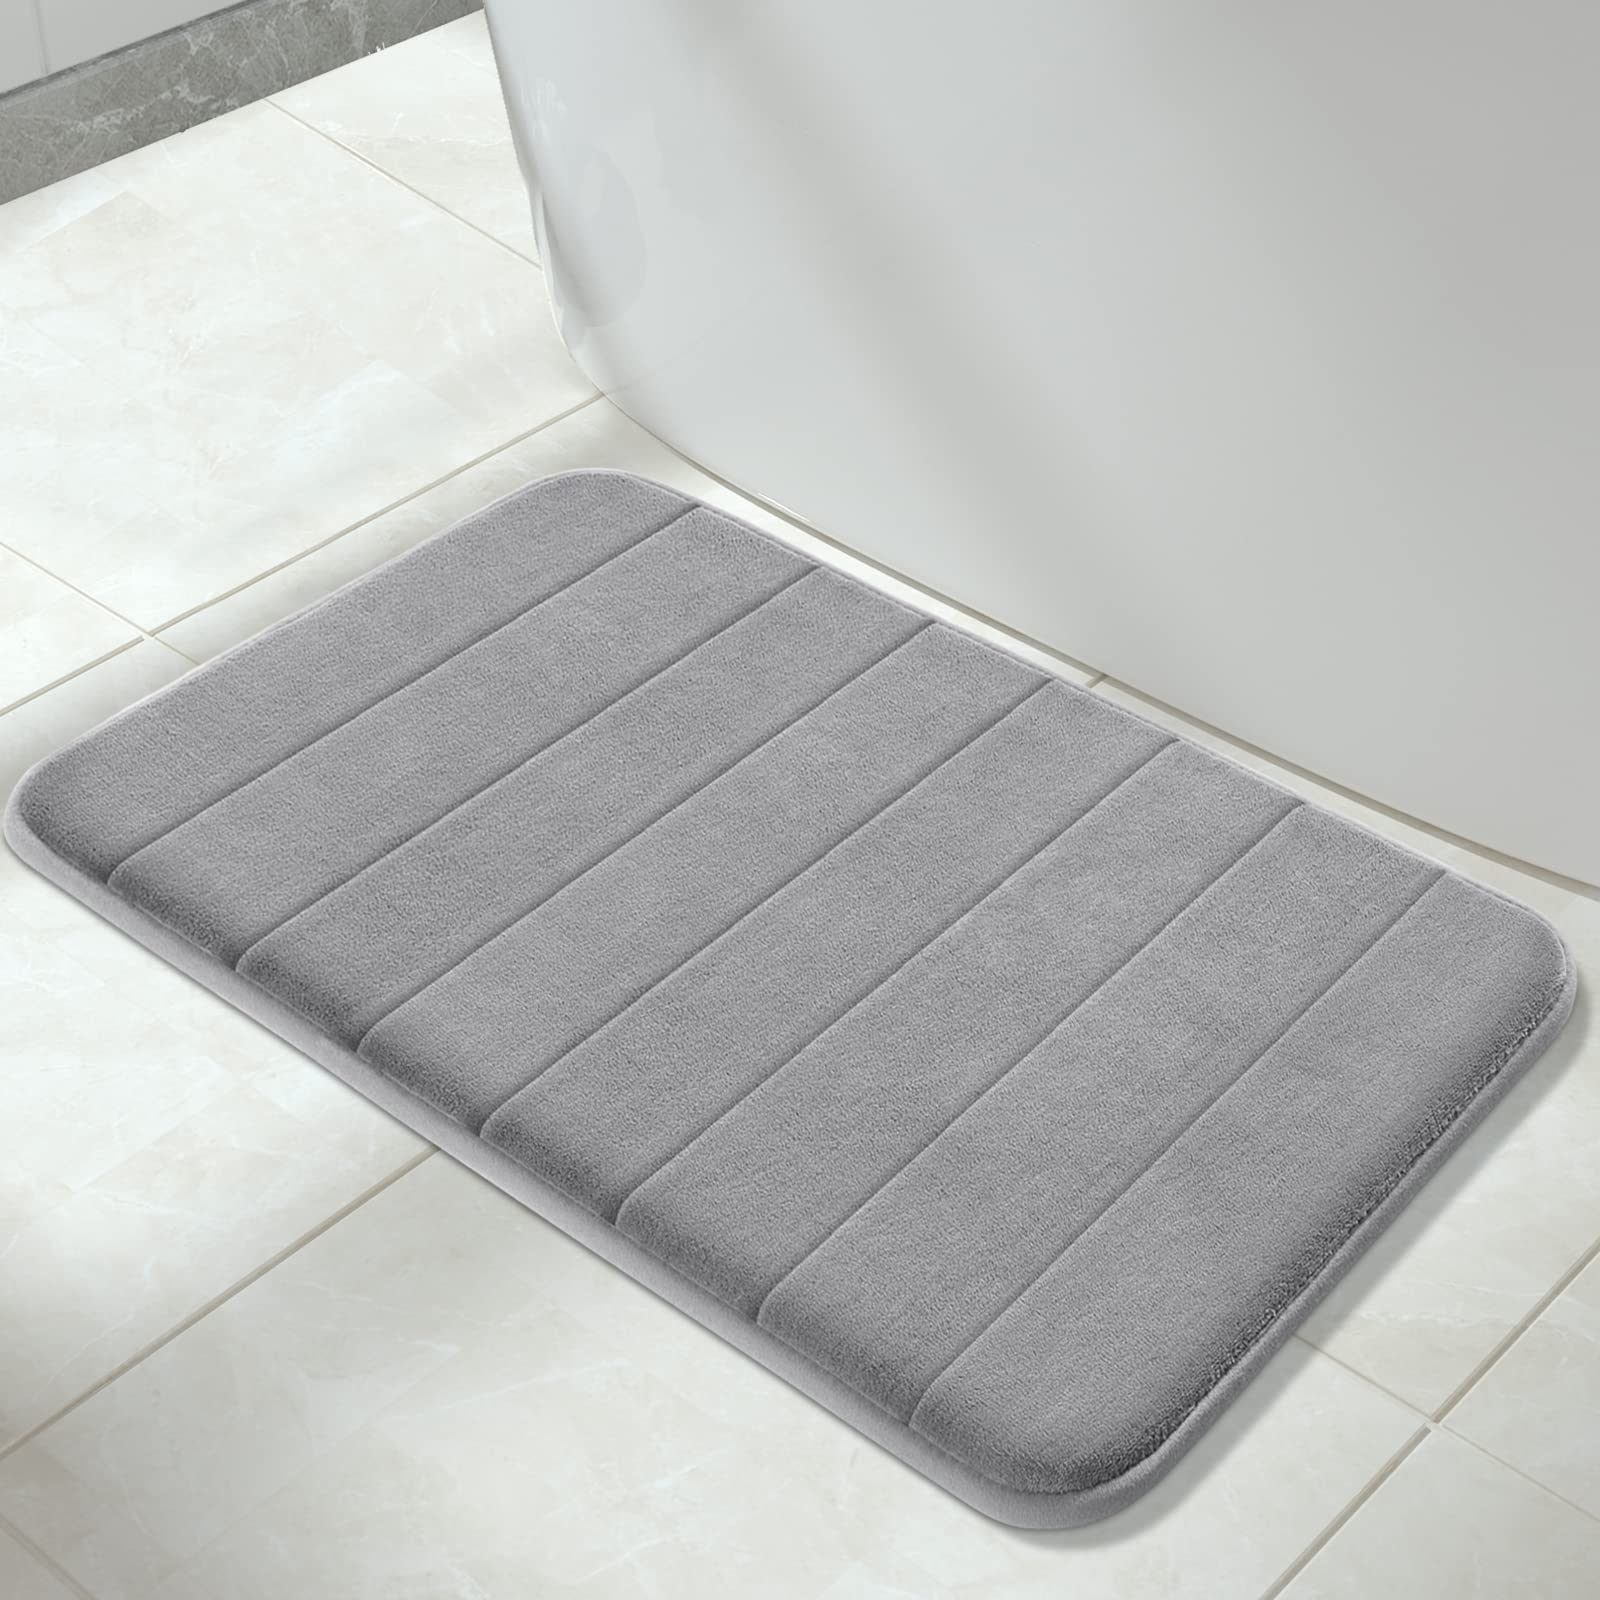 Book Cover Yimobra Memory Foam Bath Mat Large Size 31.5 by 19.8 Inches, Soft and Comfortable, Super Water Absorption, Non-Slip, Thick, Machine Wash, Easier to Dry for Bathroom Floor Rug, Grey Grey 31.5